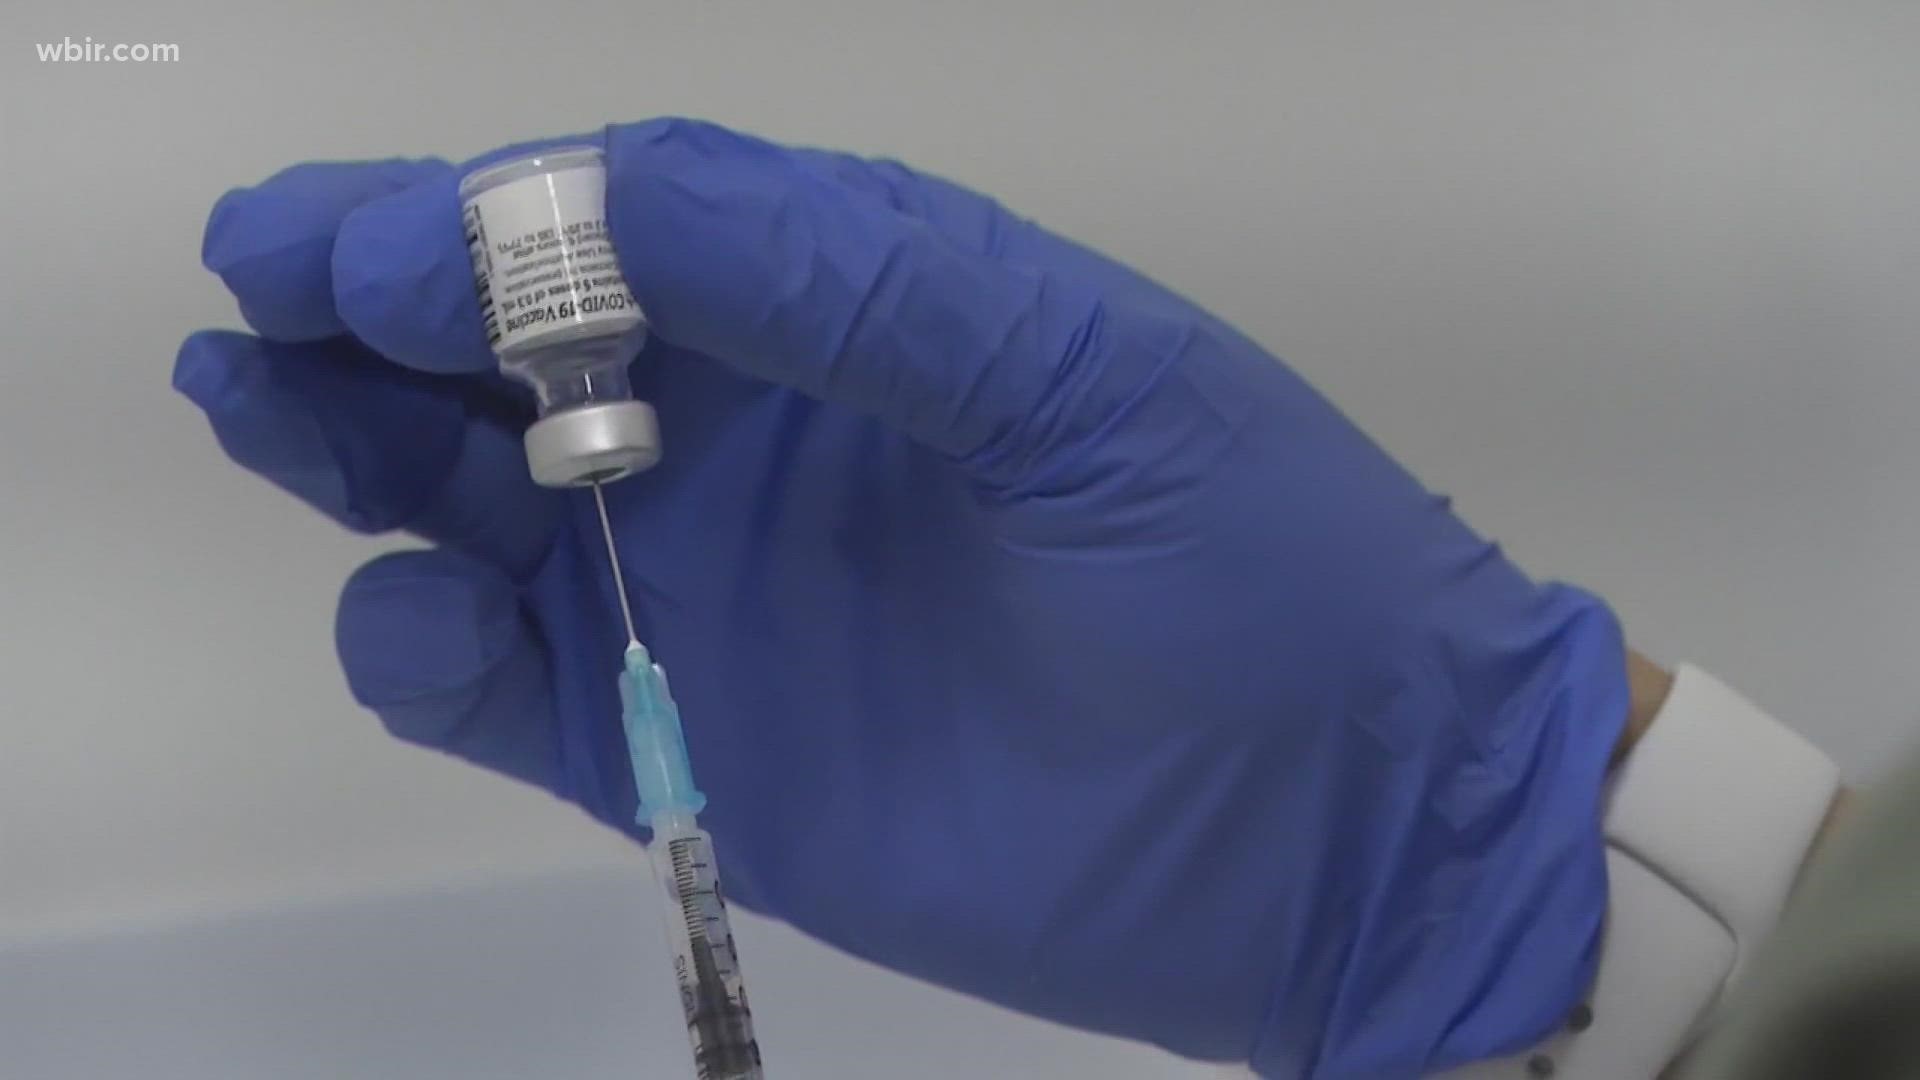 AMR Knoxville is getting ready to launch a new vaccine trial, and it comes in pill form.